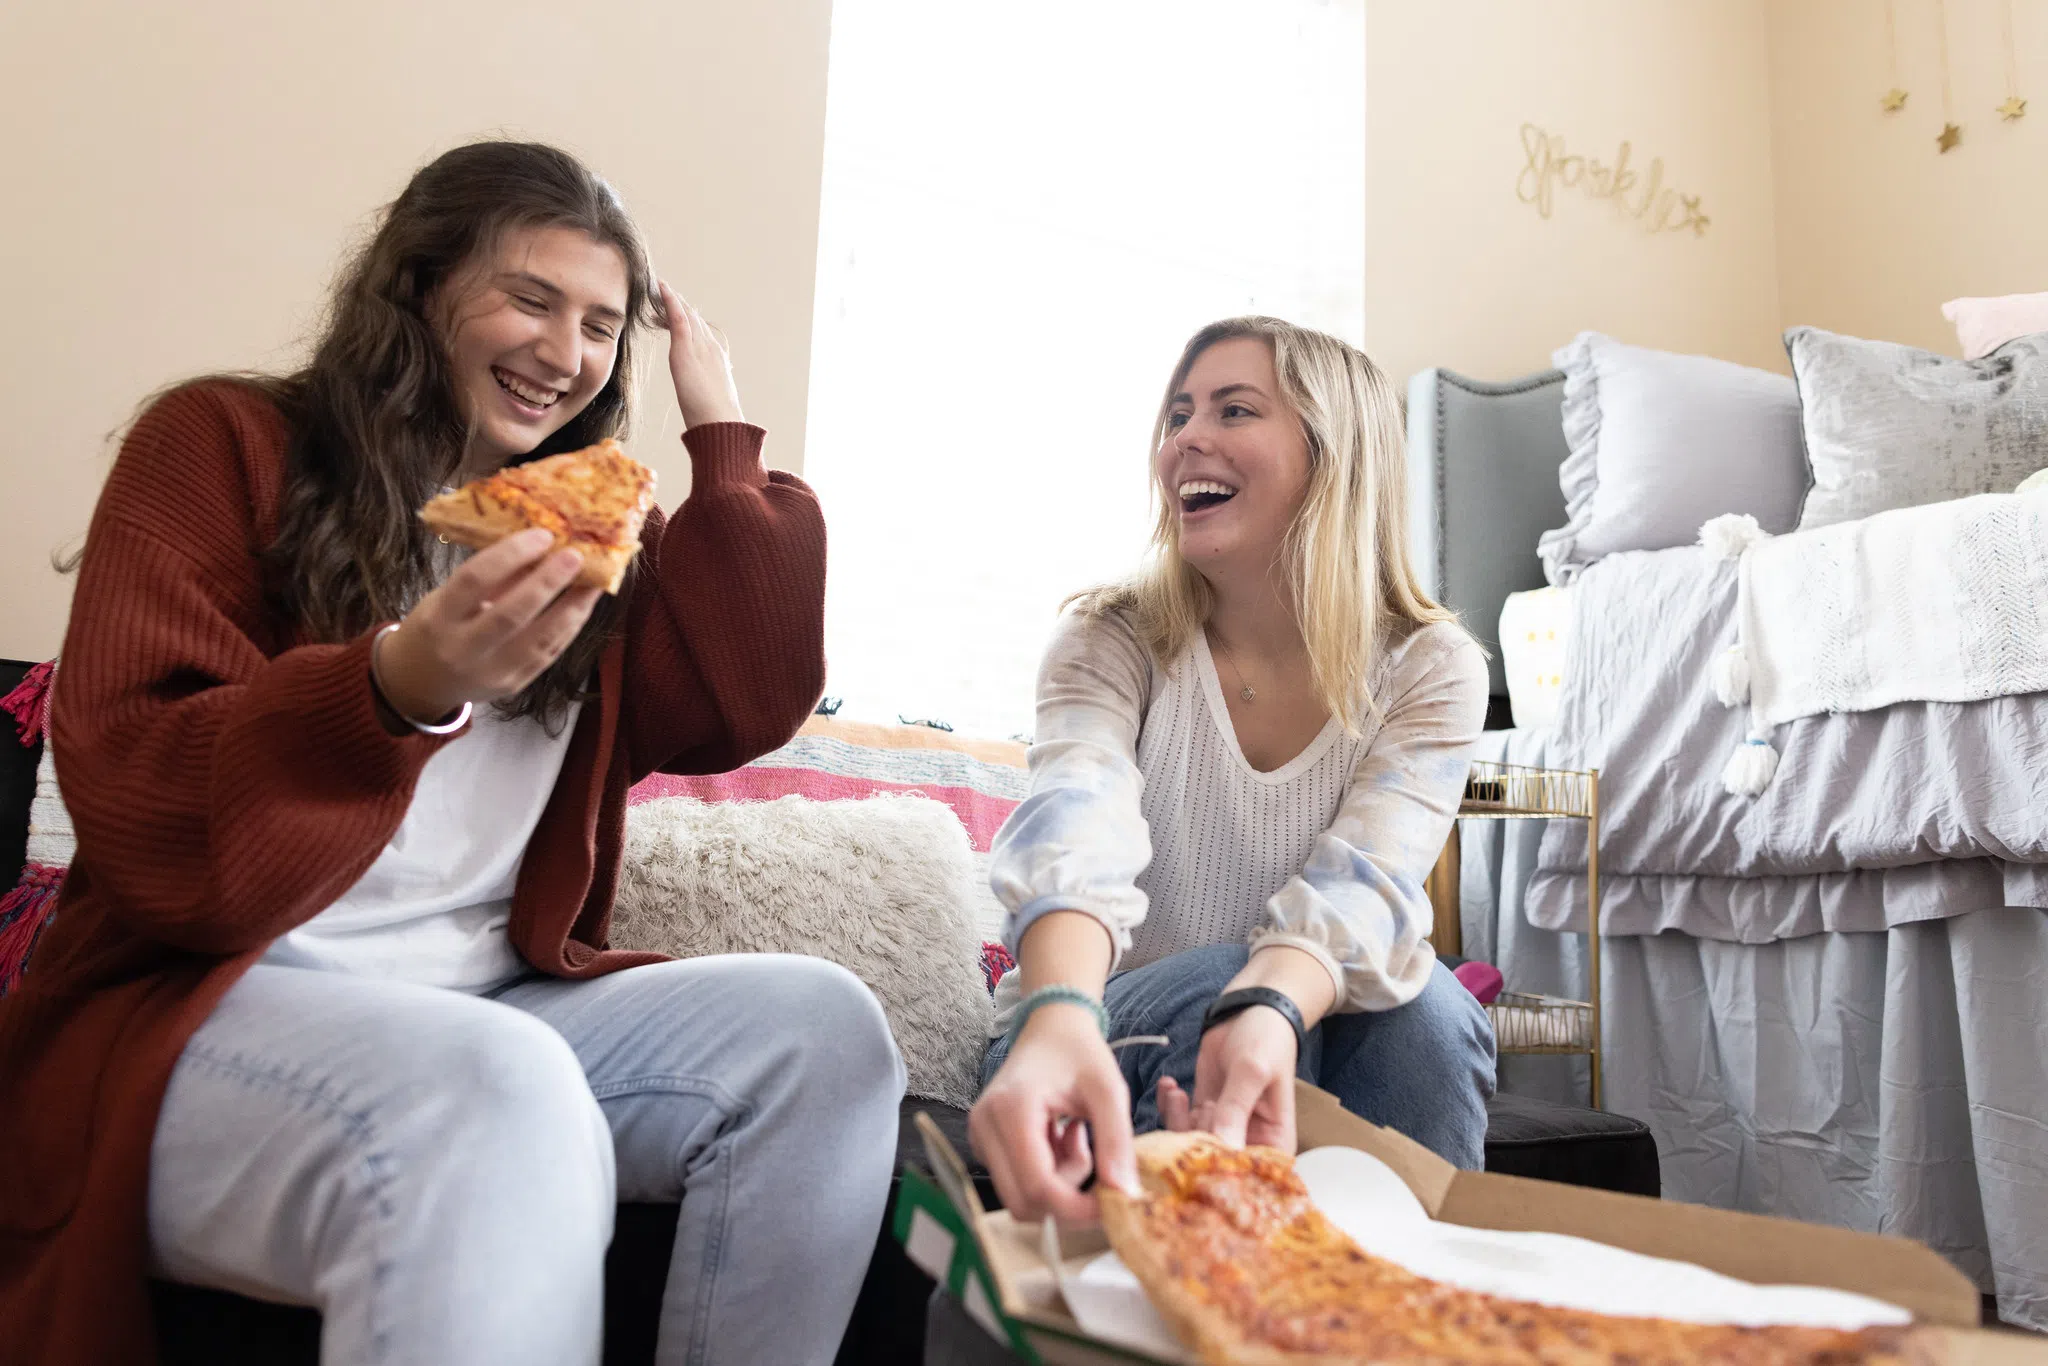 Two women laugh over a slice of pizza in a dorm room in front of a large window and a bed in the corner.